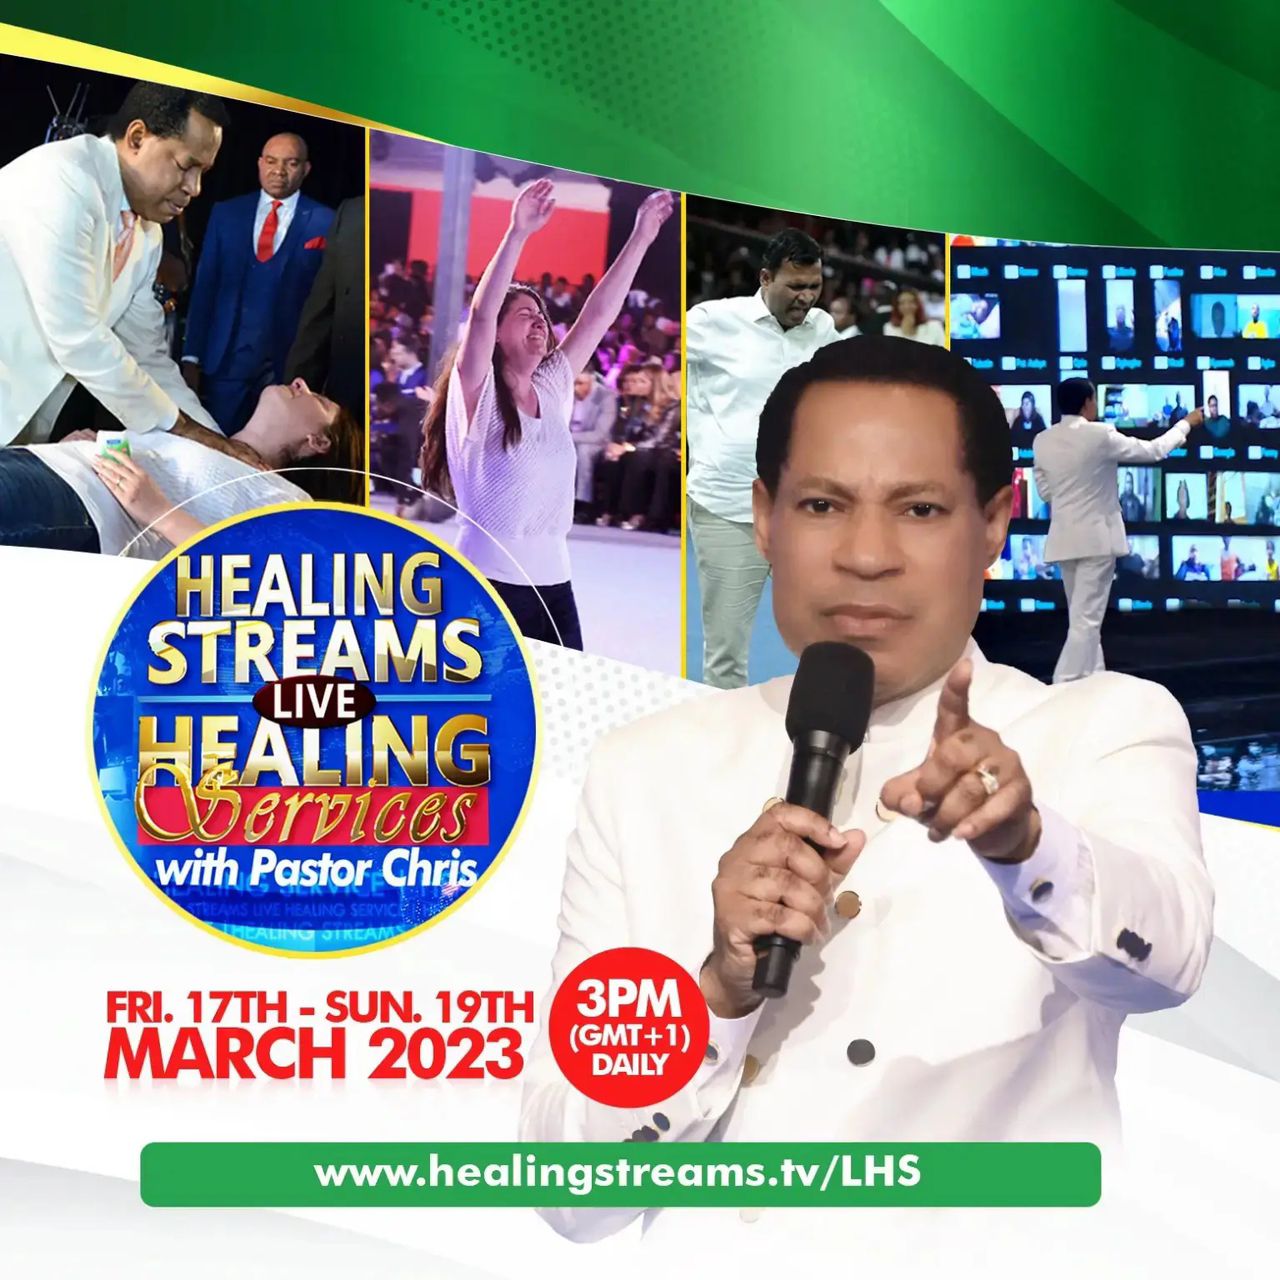 Its Another Session of Miracles At The March 2023 Healing Streams Services With Pastor Chris